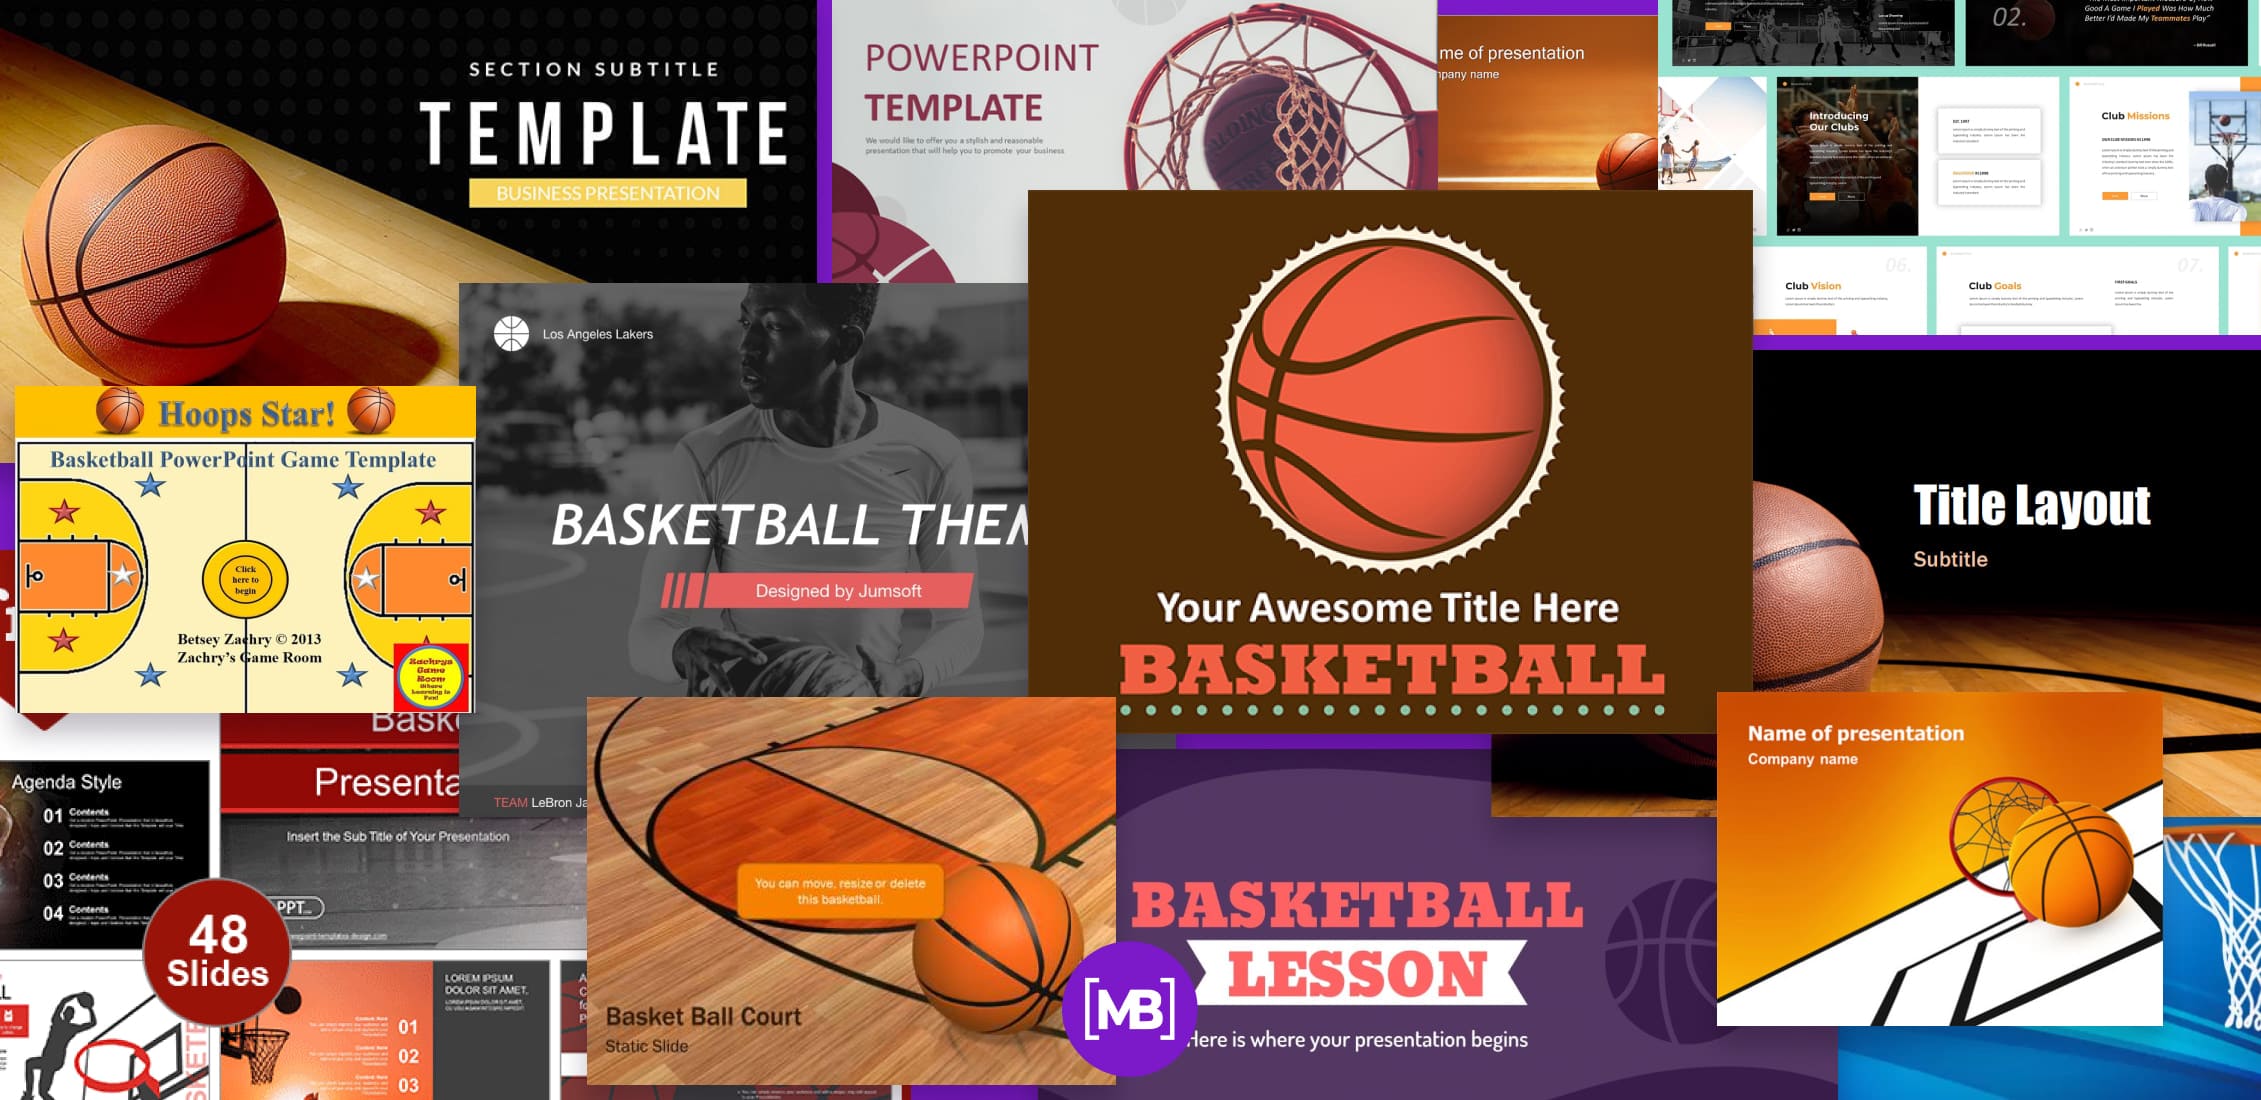 Best Basketball PowerPoint Templates Post Example.